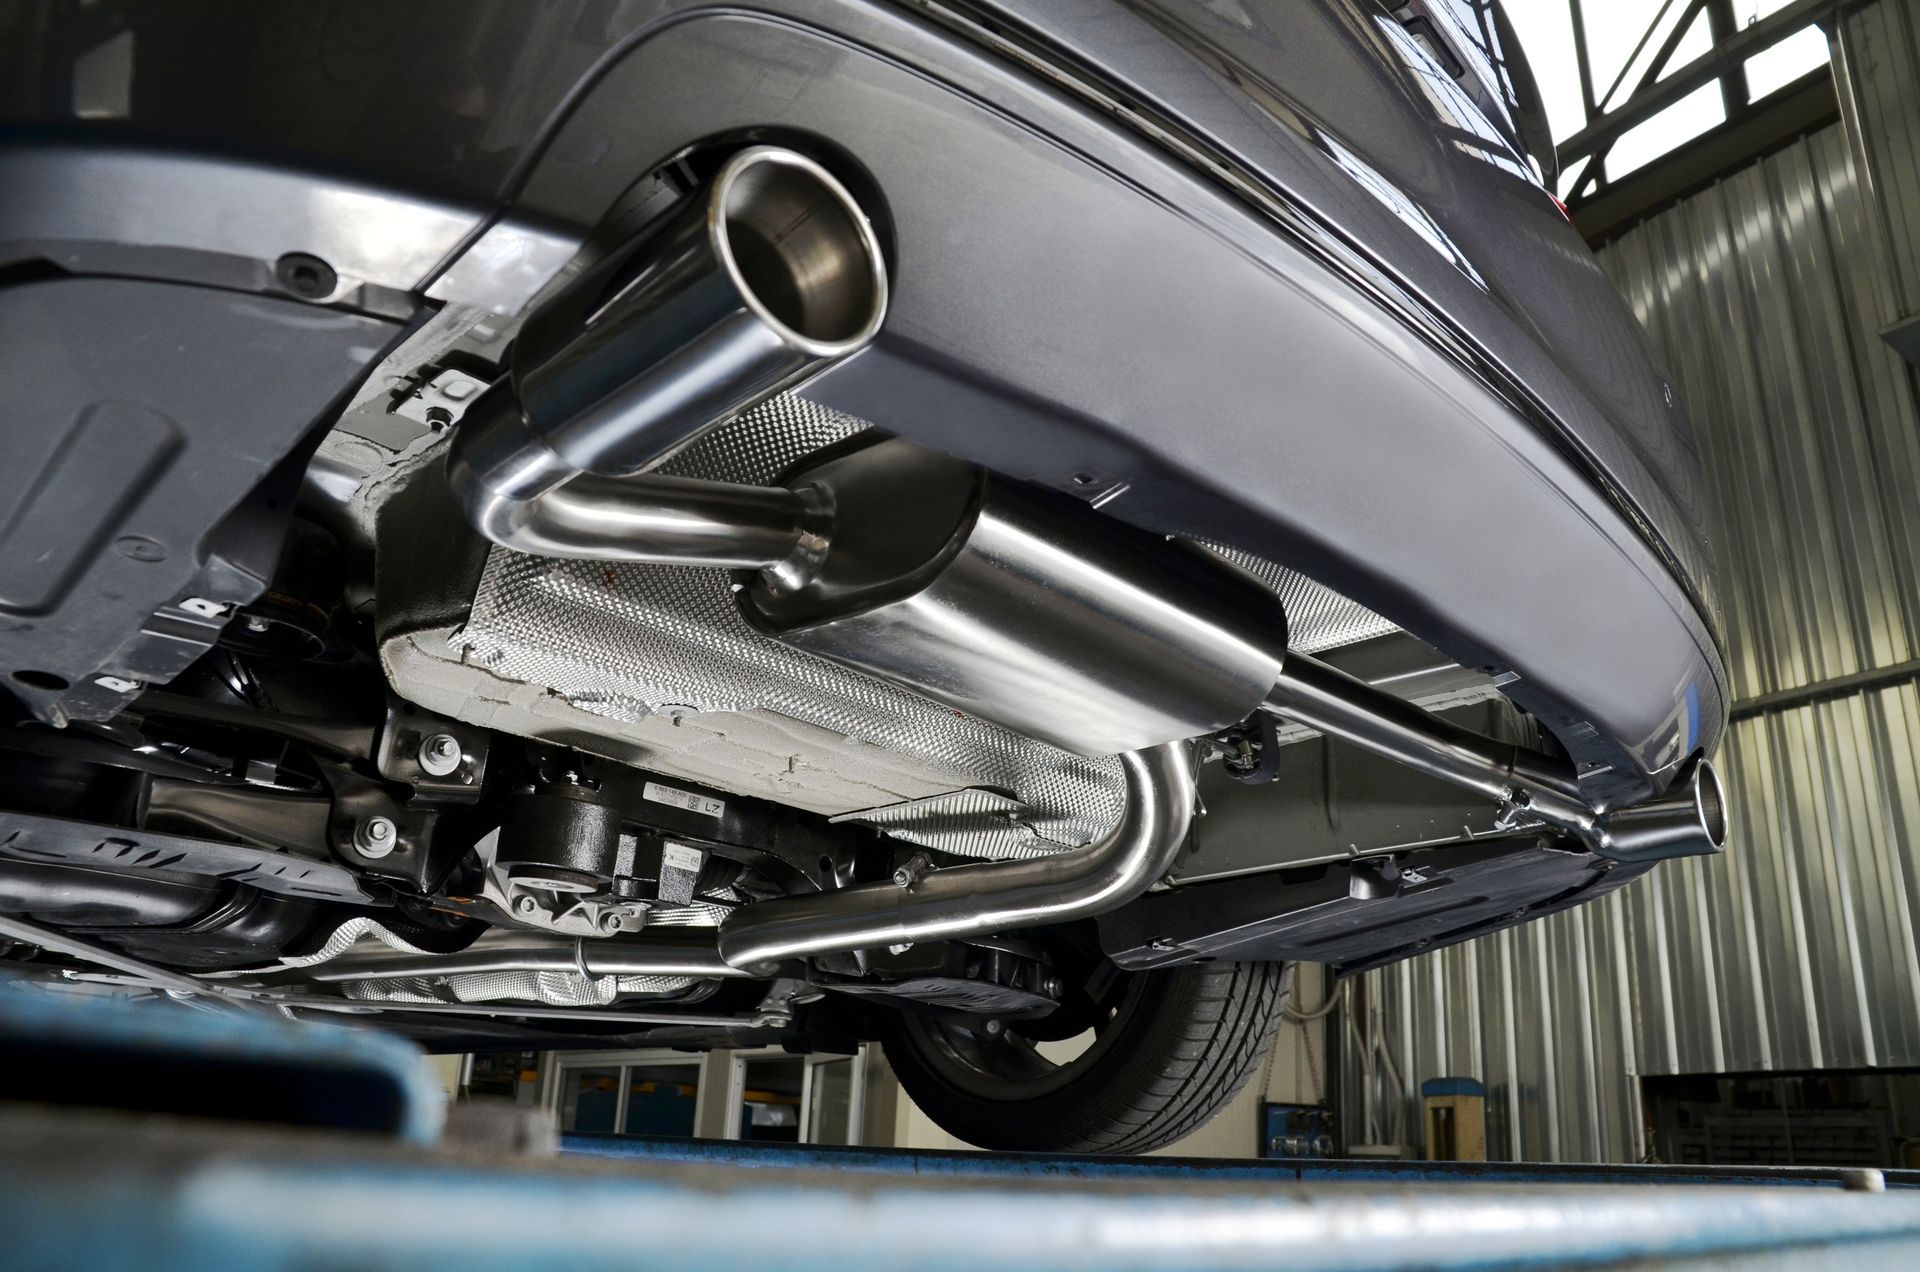 Exhaust Service at ﻿Jerry's Auto Repair﻿ in ﻿Pullman, WA﻿